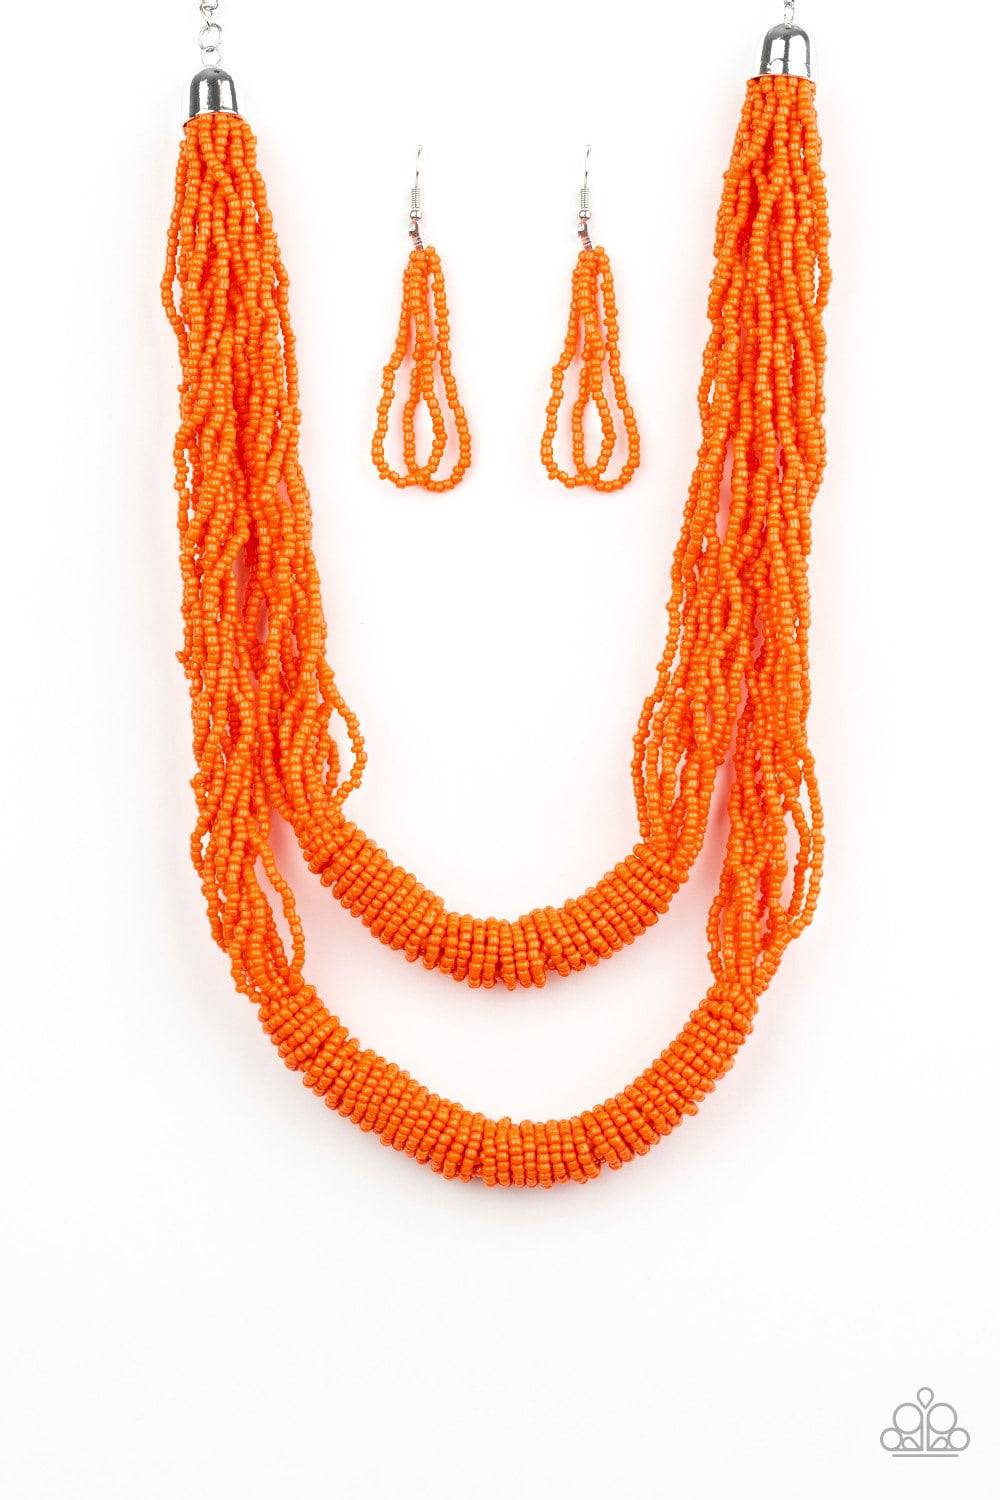 Right As RAINFOREST - Orange Seed Bead Necklace - Paparazzi Accessories - GlaMarous Titi Jewels